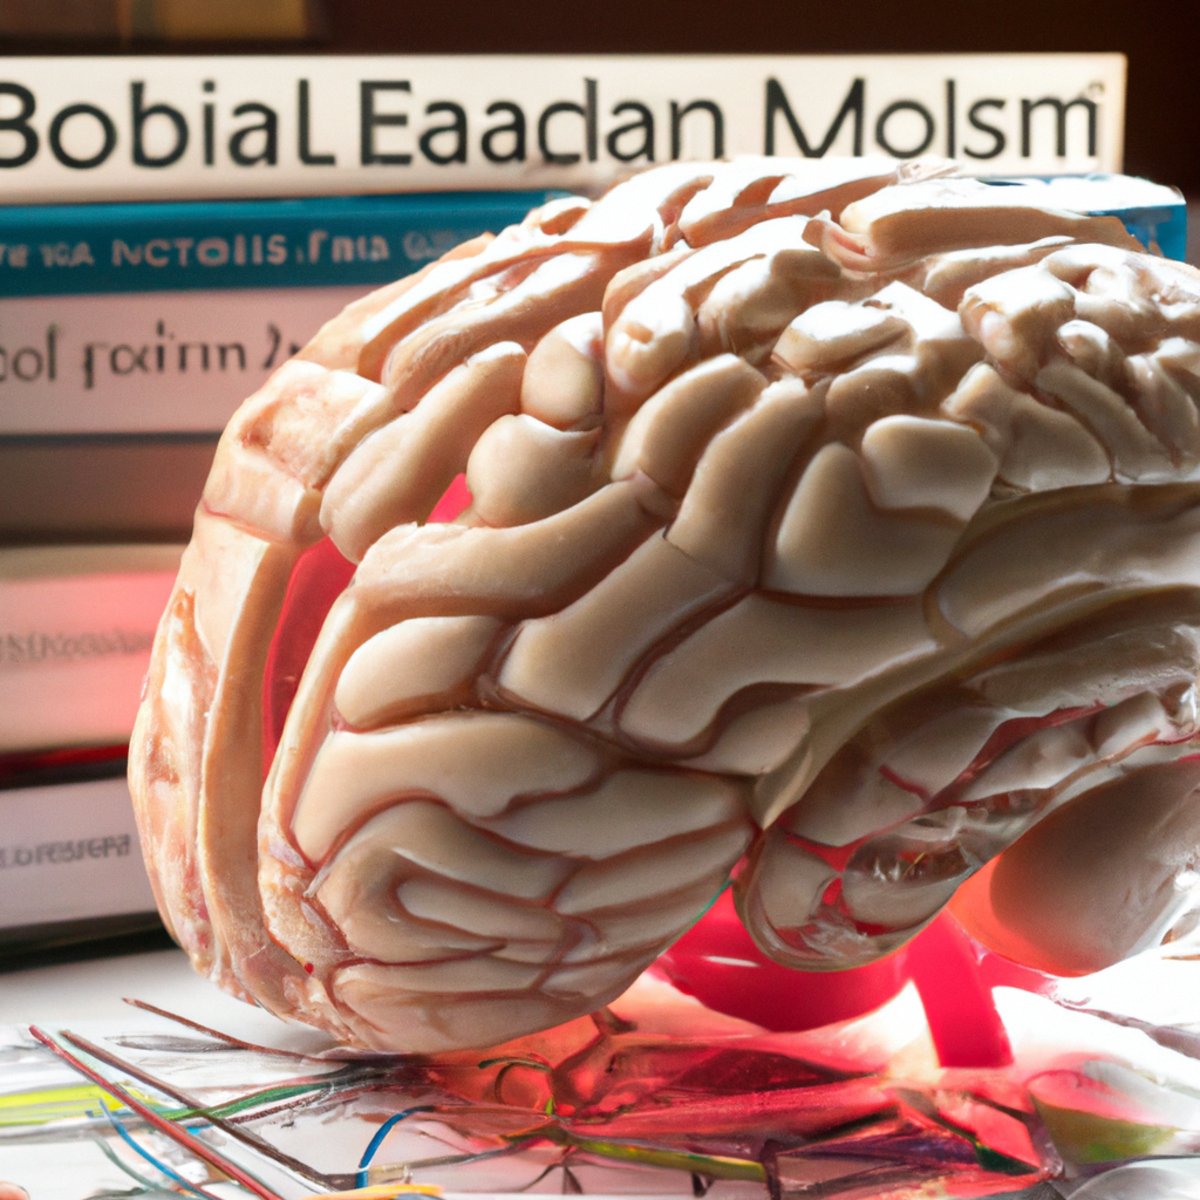 Close-up of intricate brain model on modern desk, surrounded by medical texts, symbolizing scientific understanding of CADASIL.